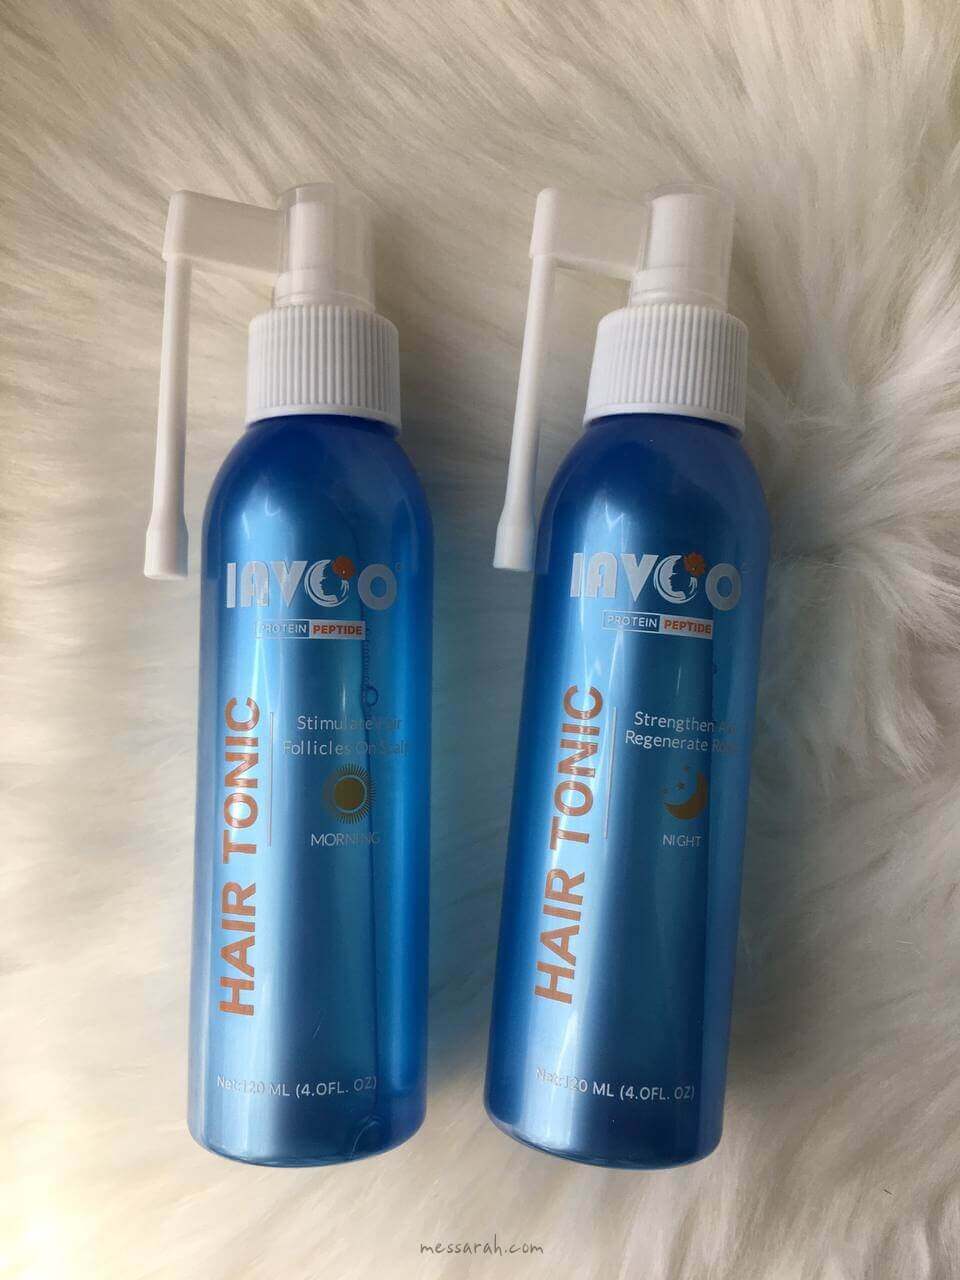 Lavoo Protein Peptide Hair Tonic